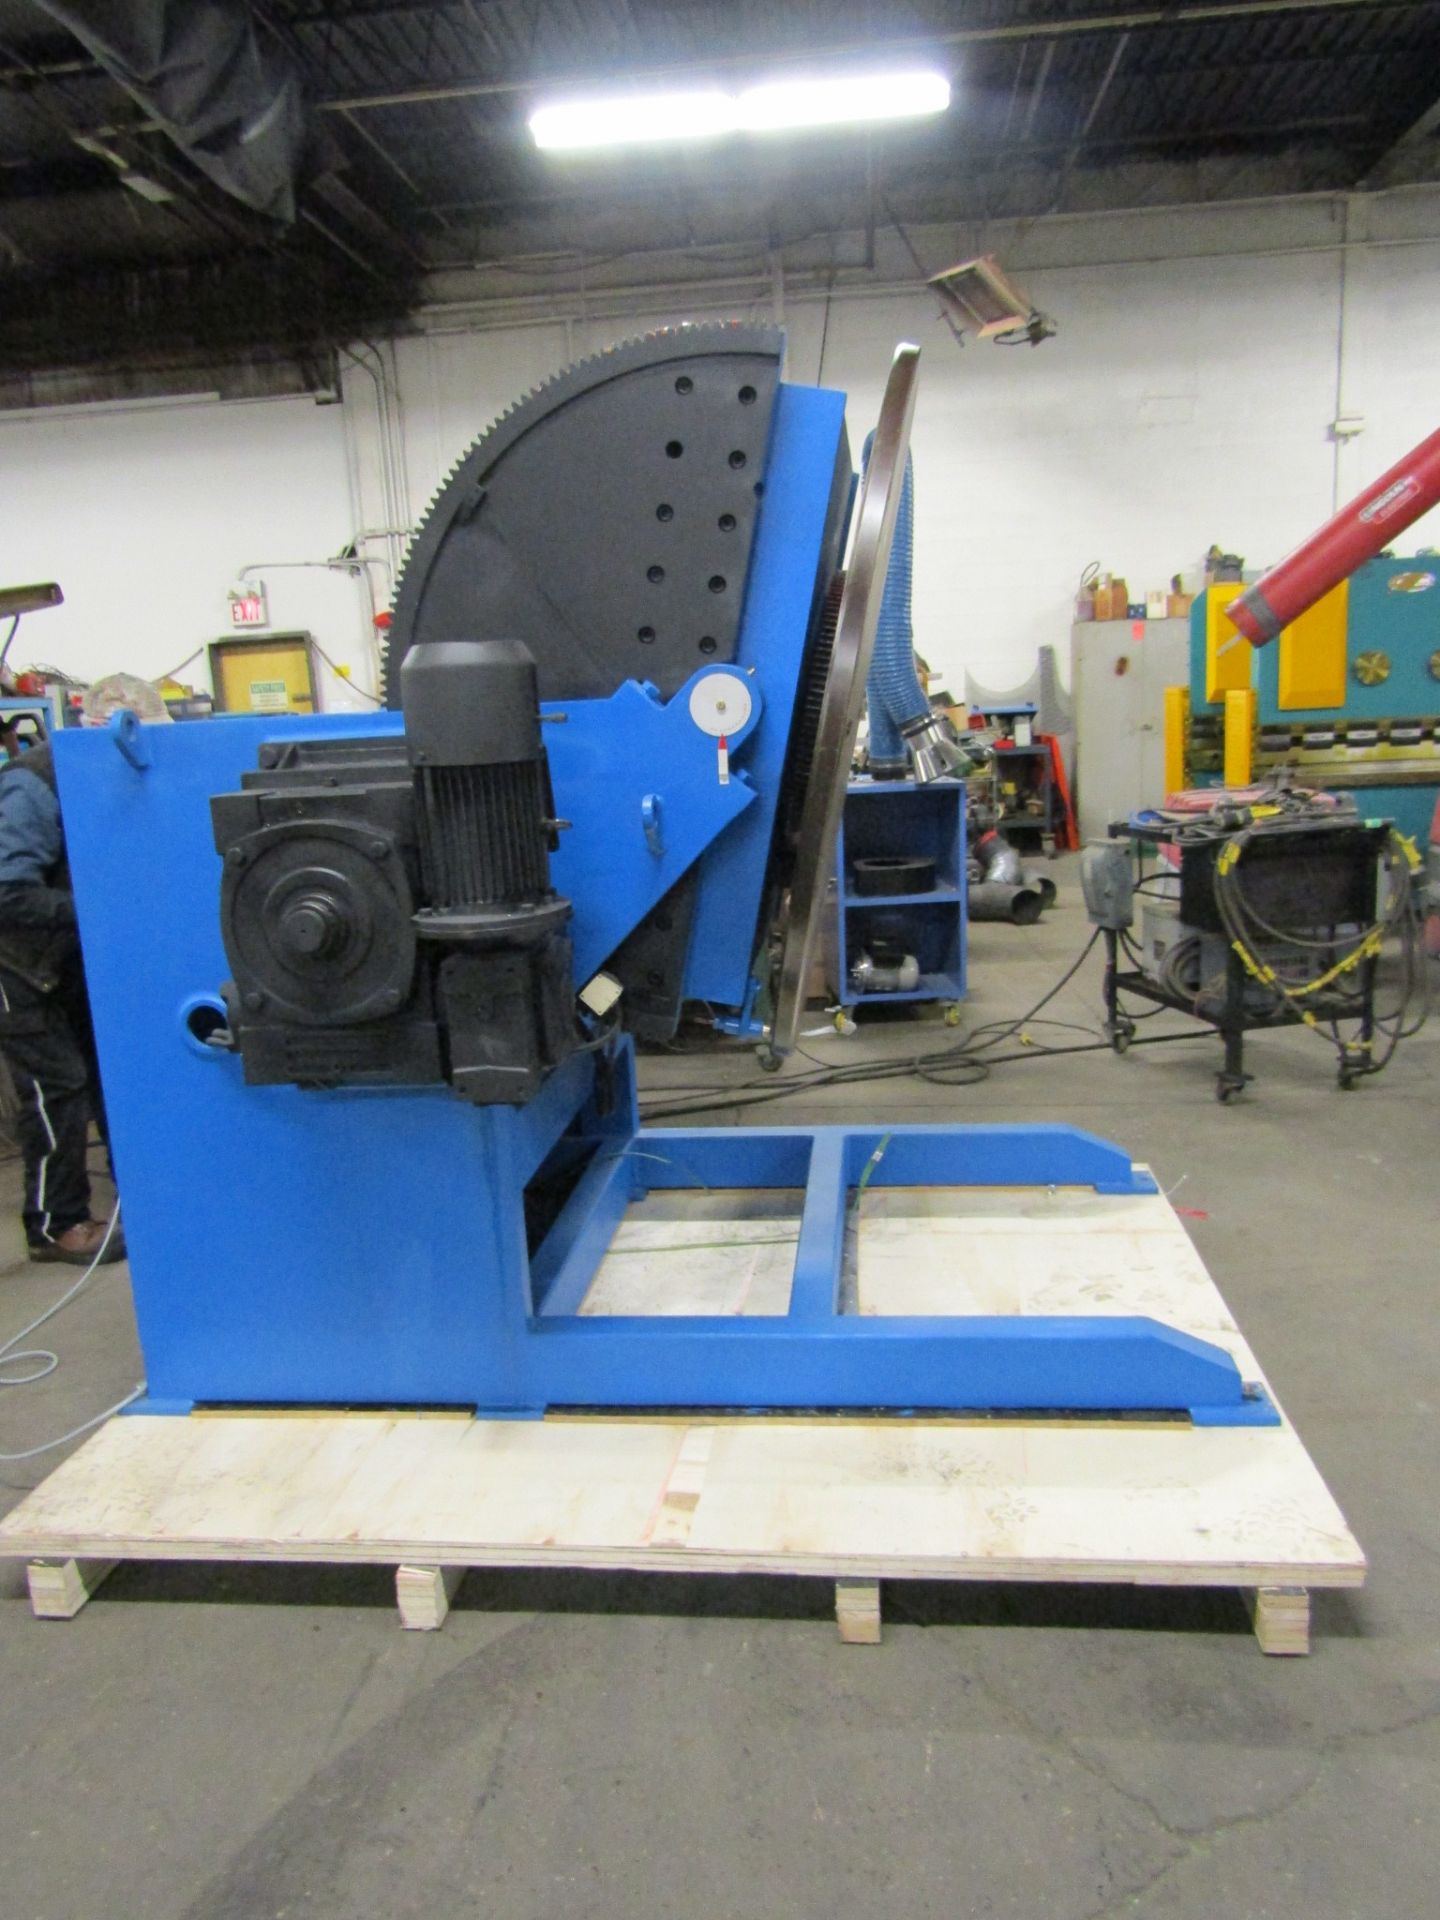 Verner model VD-8000 WELDING POSITIONER 8000lbs capacity - tilt and rotate with variable speed drive - Image 2 of 4